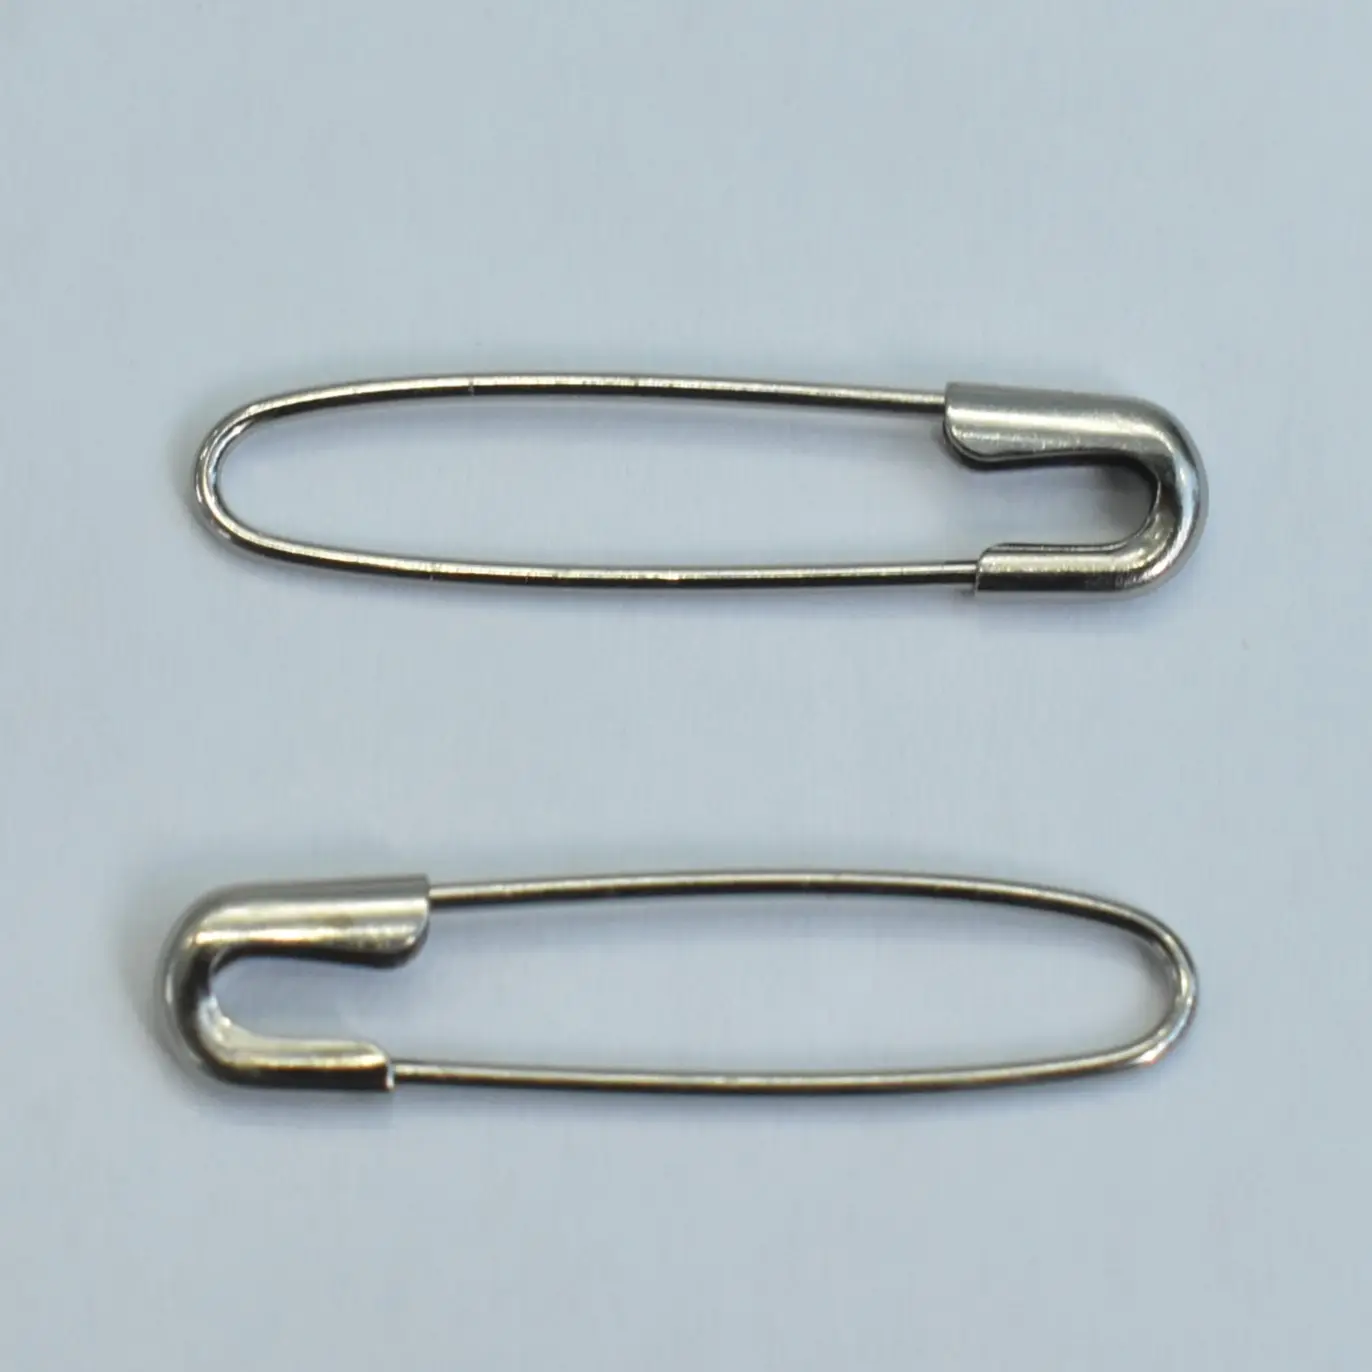 Best selling Safety Pin Snapin AH 103 electroless nickel plated brass used for hang tags luxury women's underwear safety pin